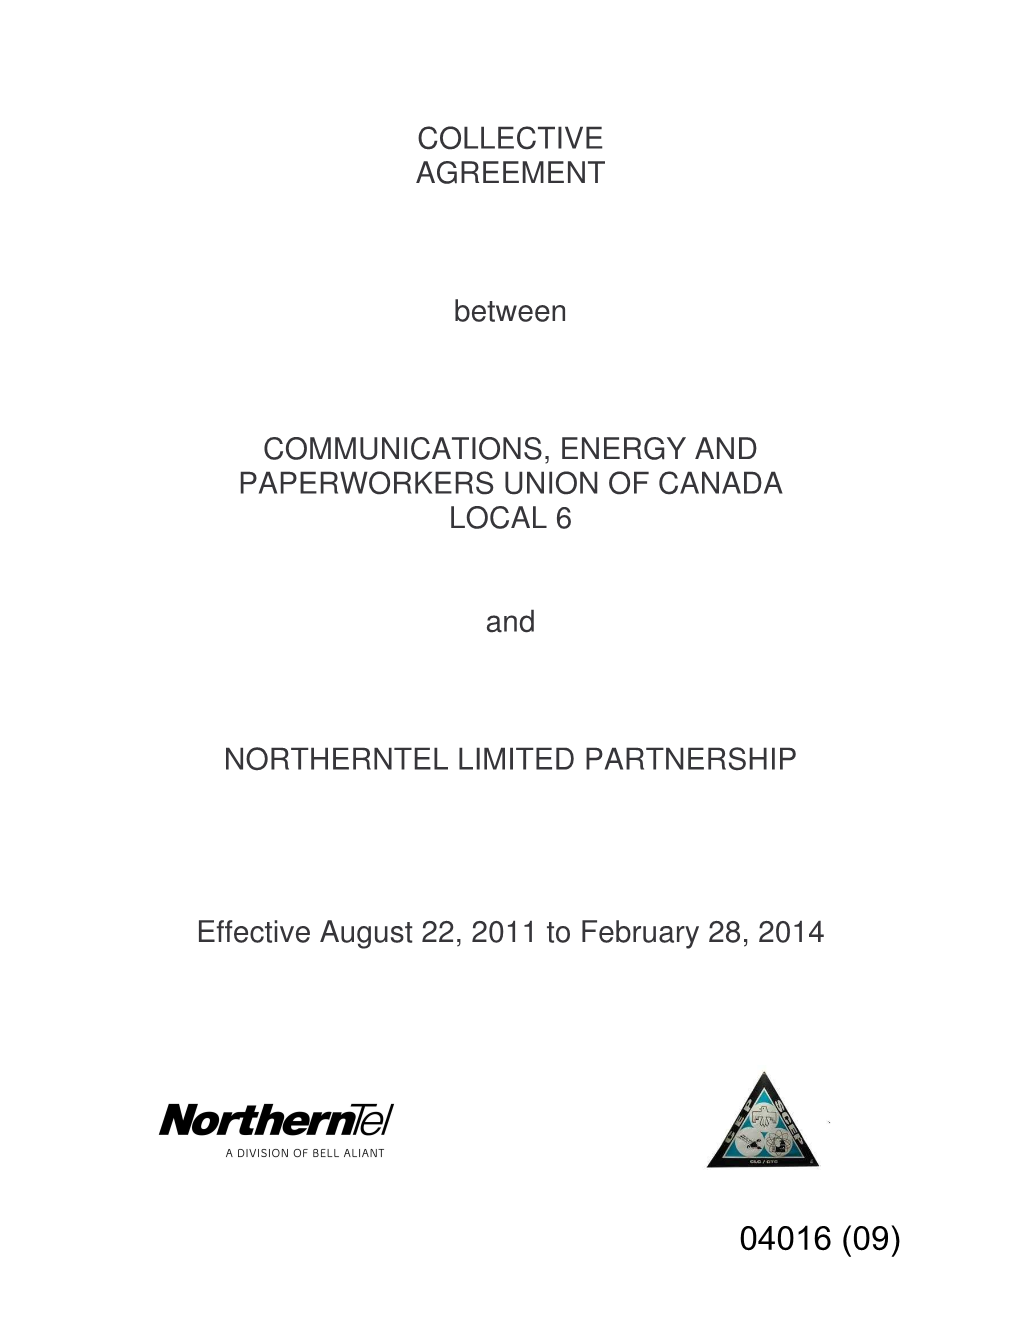 COLLECTIVE AGREEMENT Between COMMUNICATIONS, ENERGY